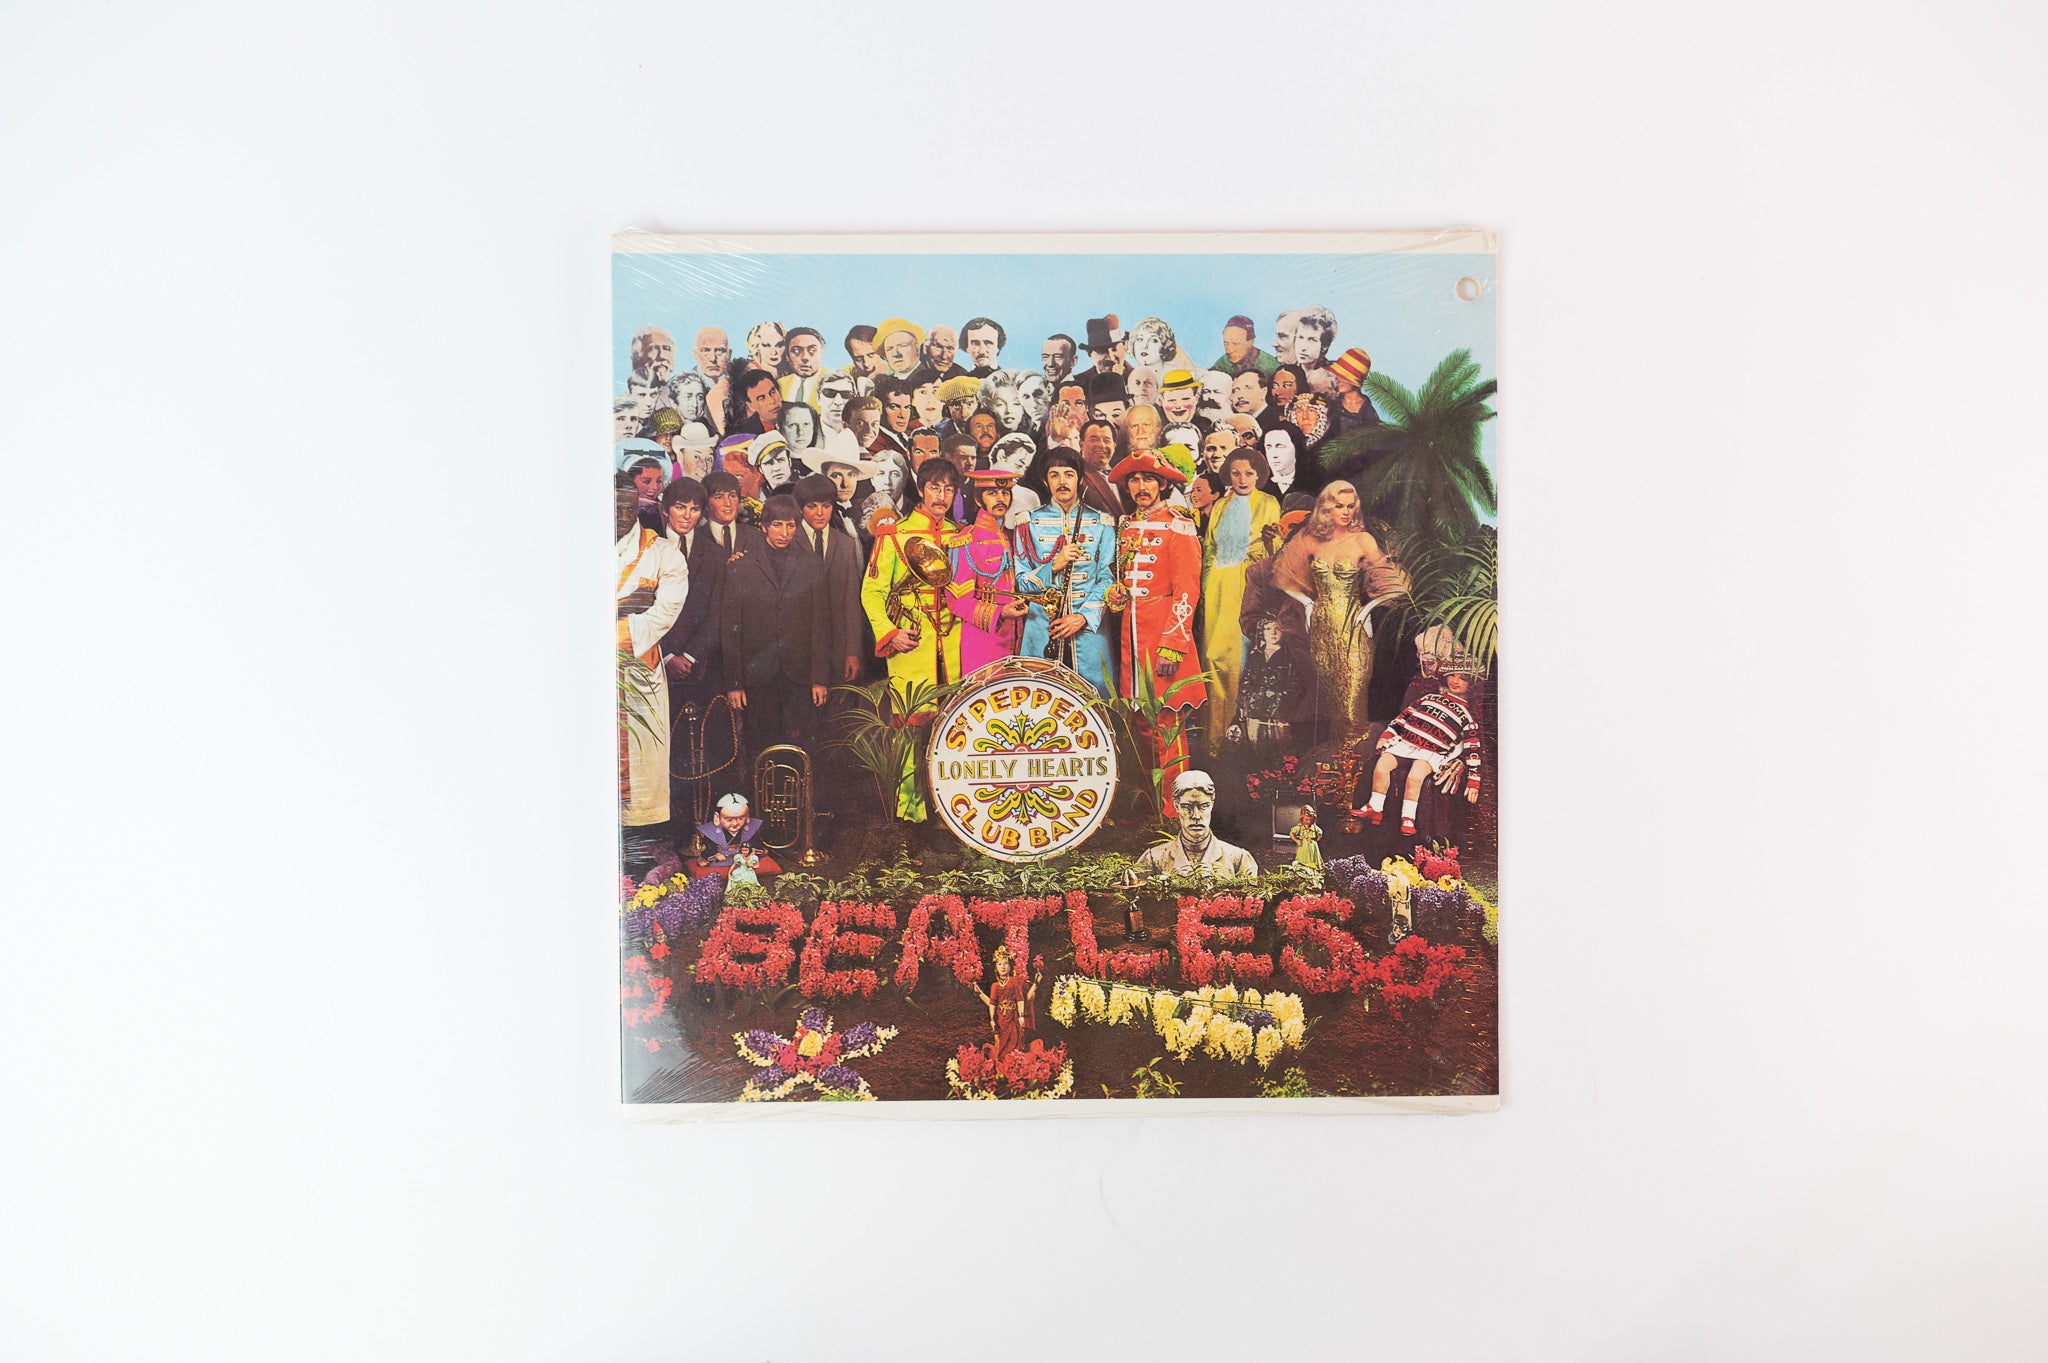 The Beatles - Sgt. Pepper's Lonely Hearts Club Band on Capitol 1970's Pressing Sealed